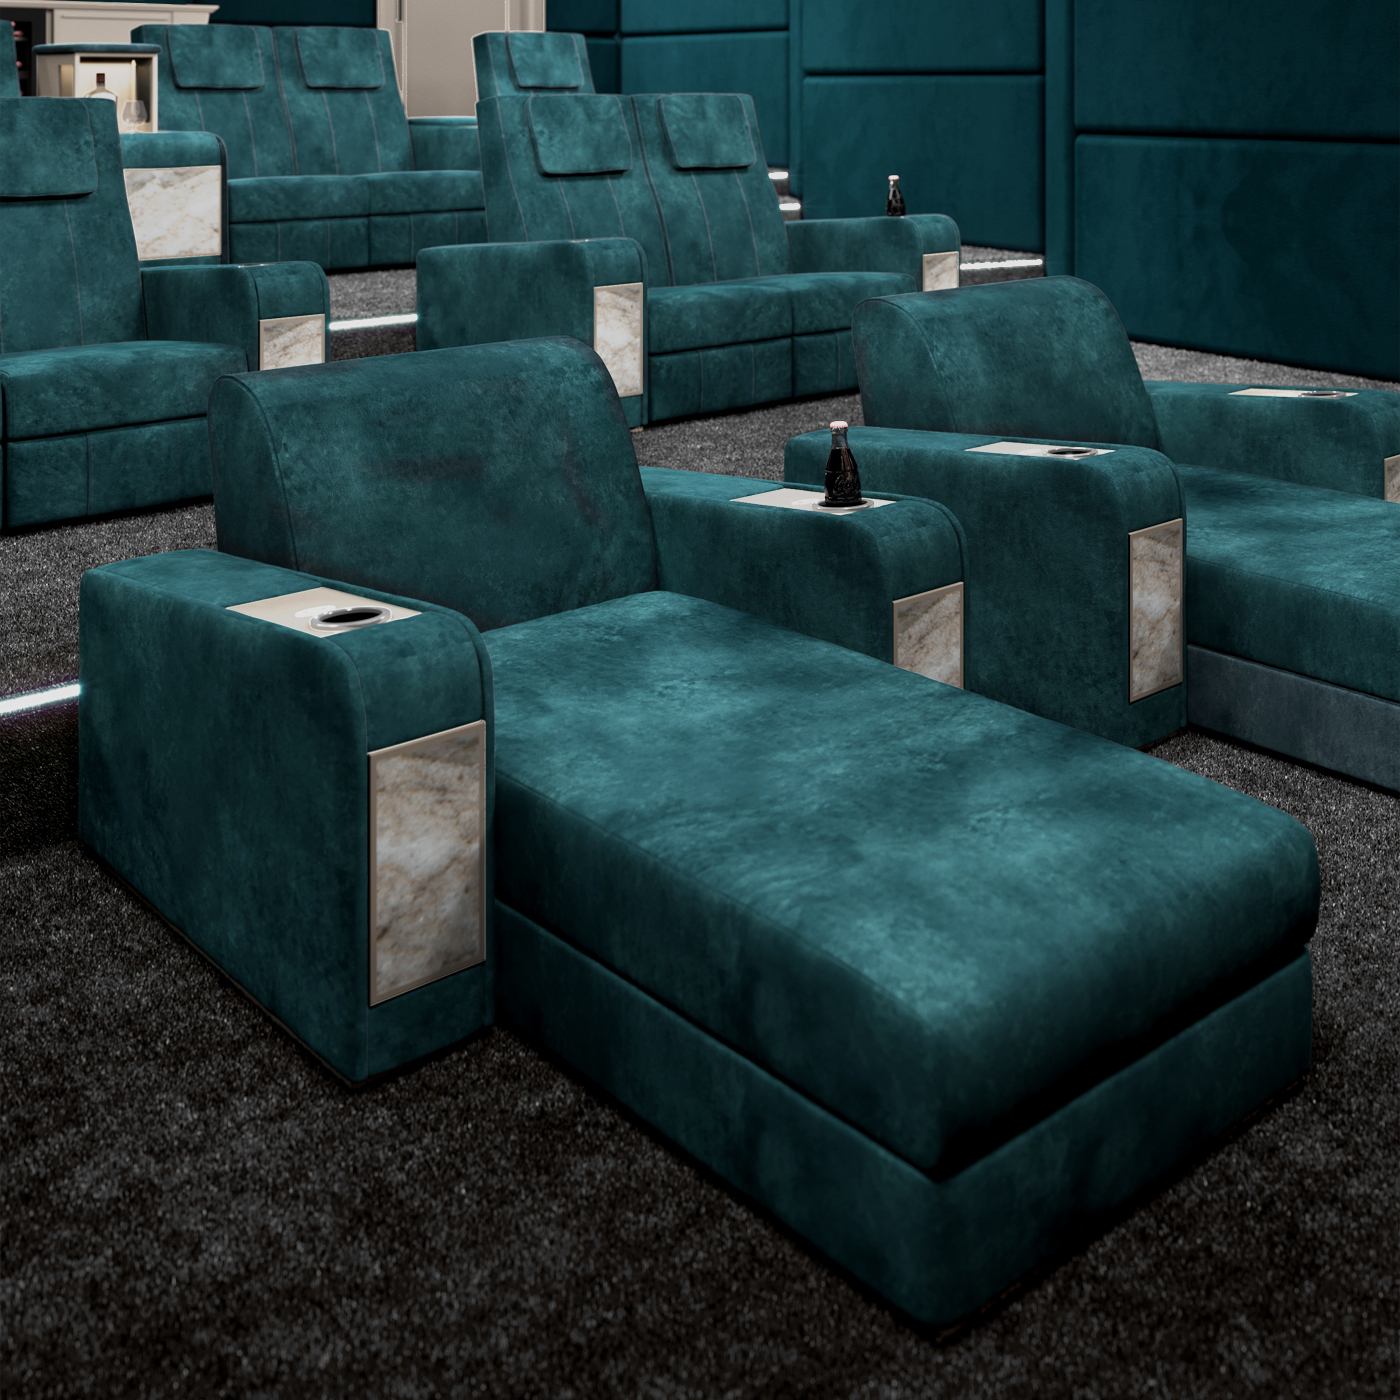 Luxury Cinema Room Sofa / At the touch of a button this room now comes